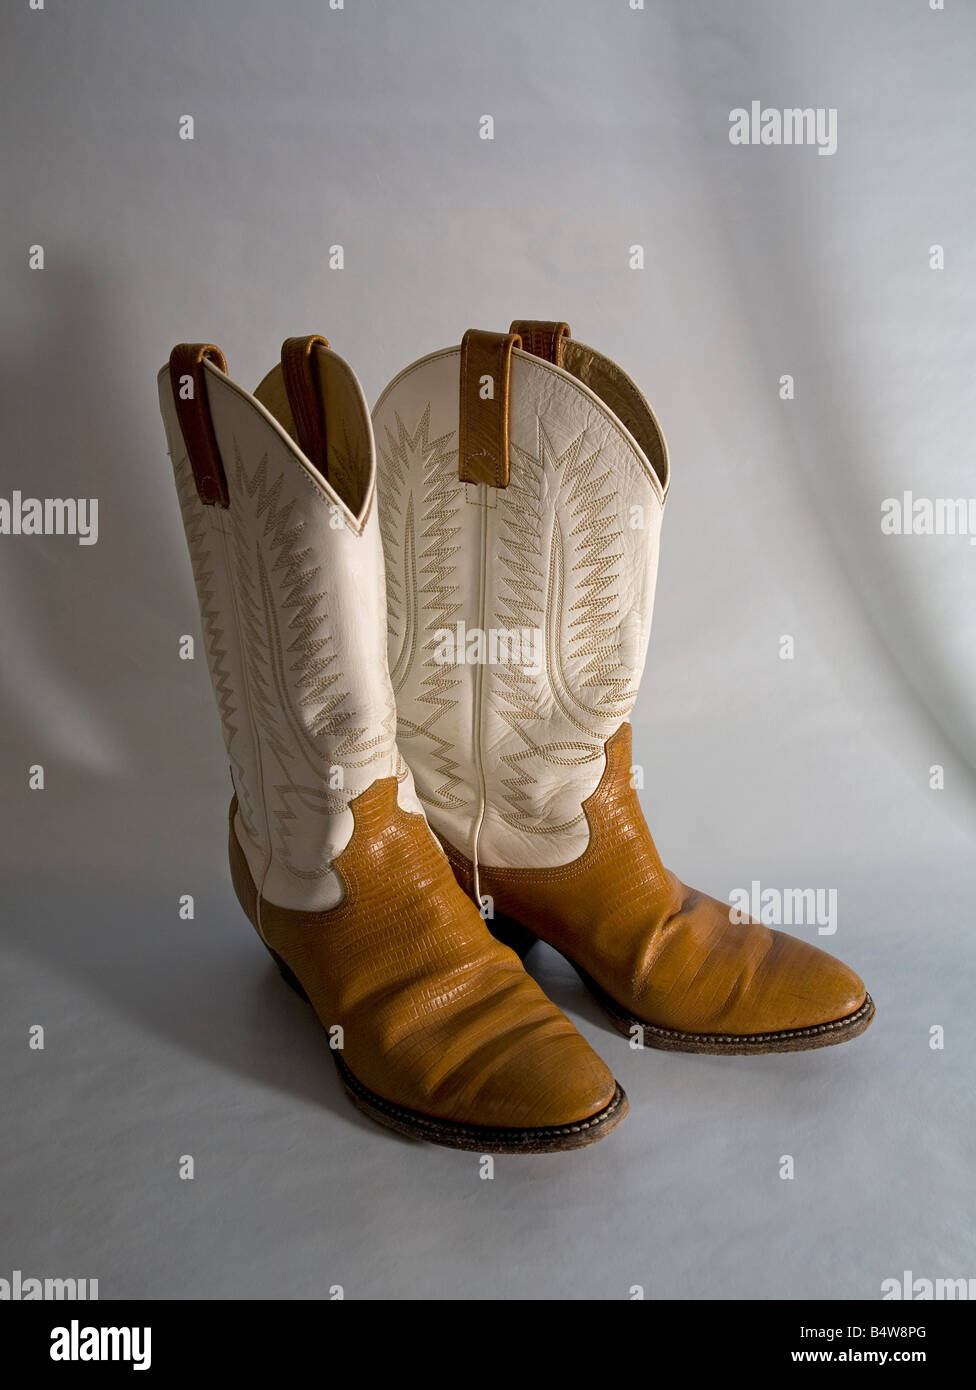 A pair of embroidered high heeled high topped western cowboy boots made in  Mexico Stock Photo - Alamy